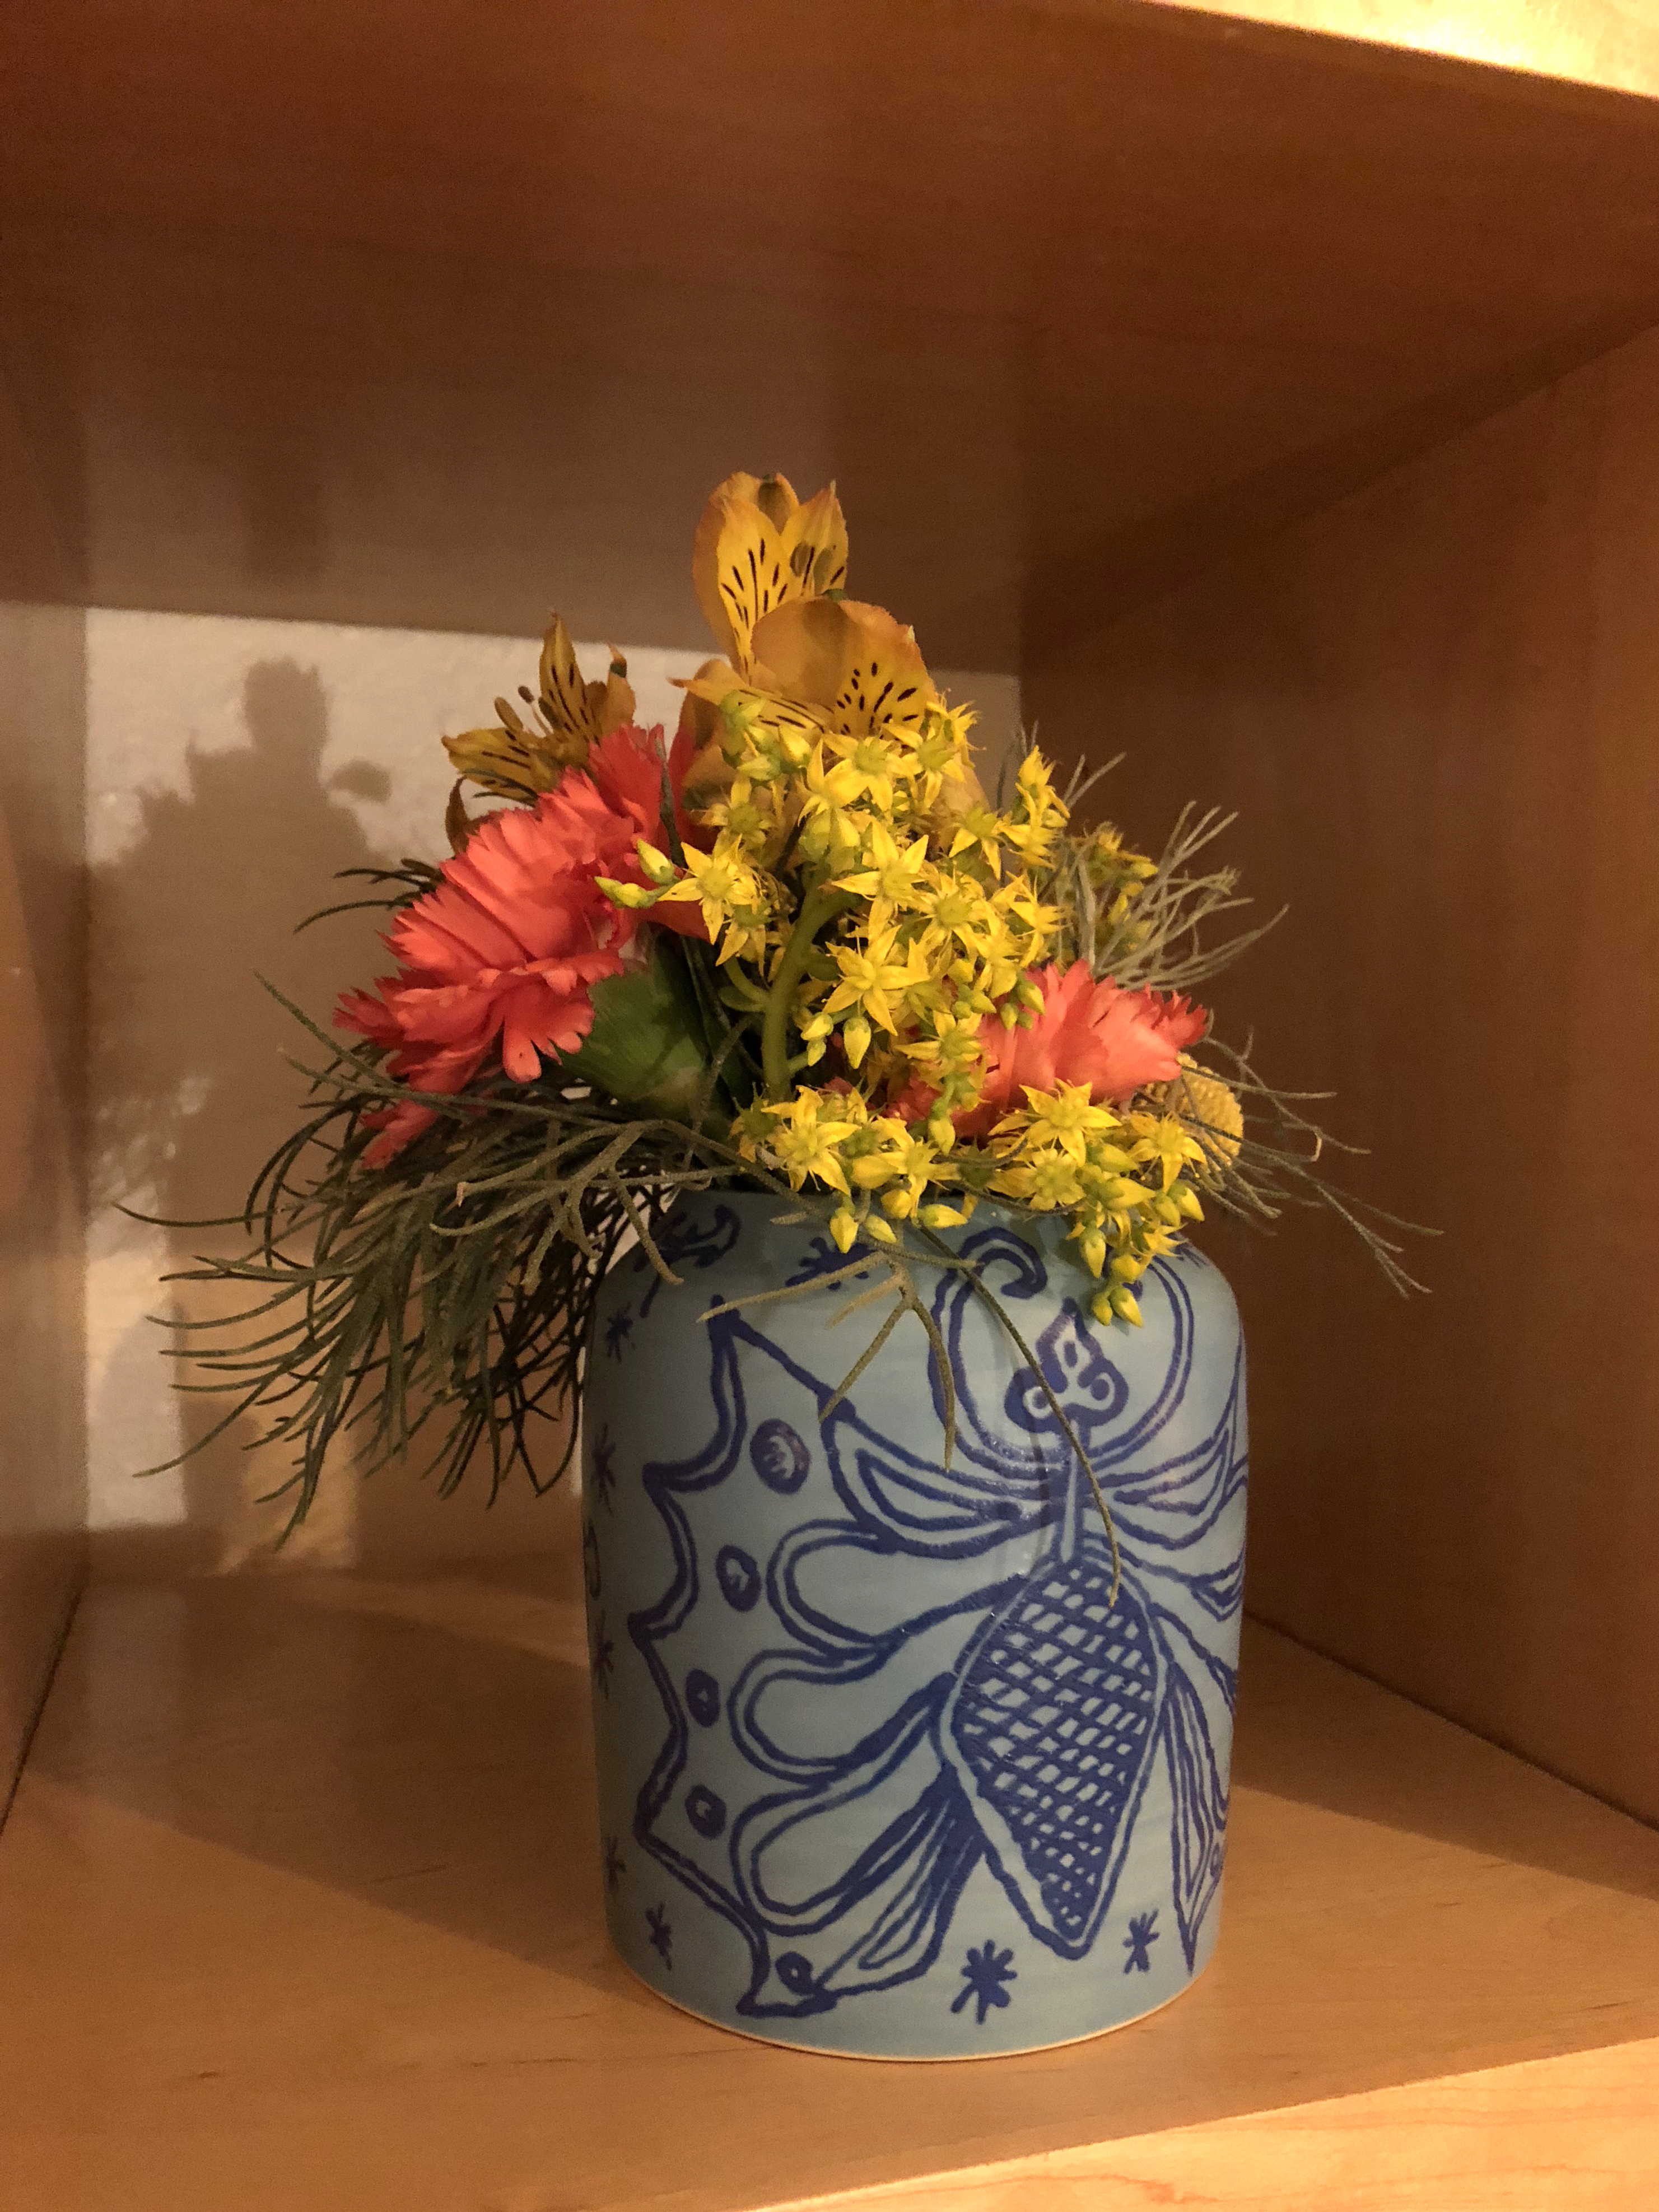 Blue ceramic vase with drawings on it holding colorful flowers